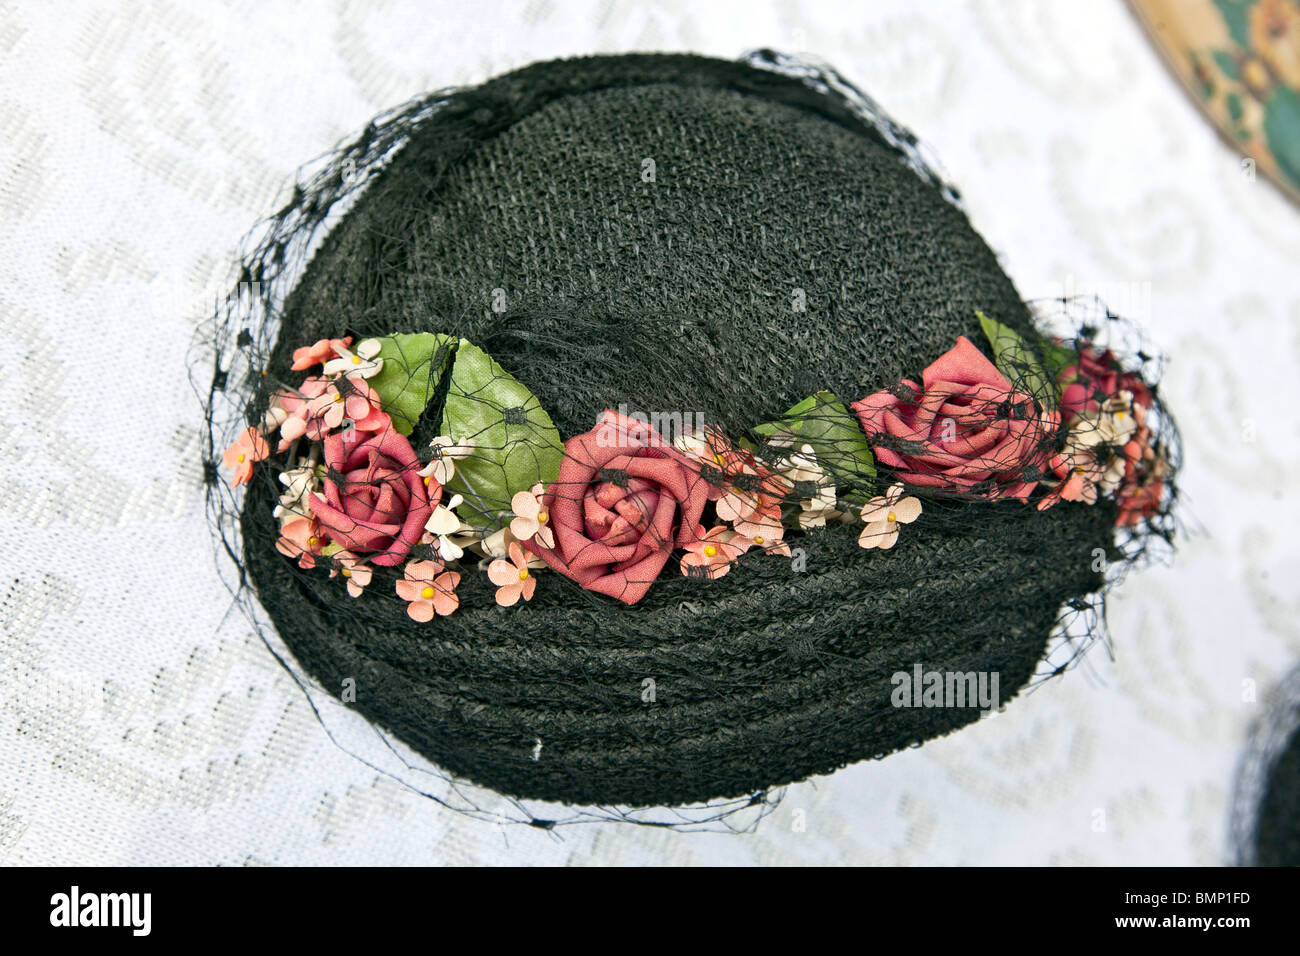 antique ladies hat trimmed with roses & veil displayed for sale at westside Manhattan block annual flea market New York city Stock Photo